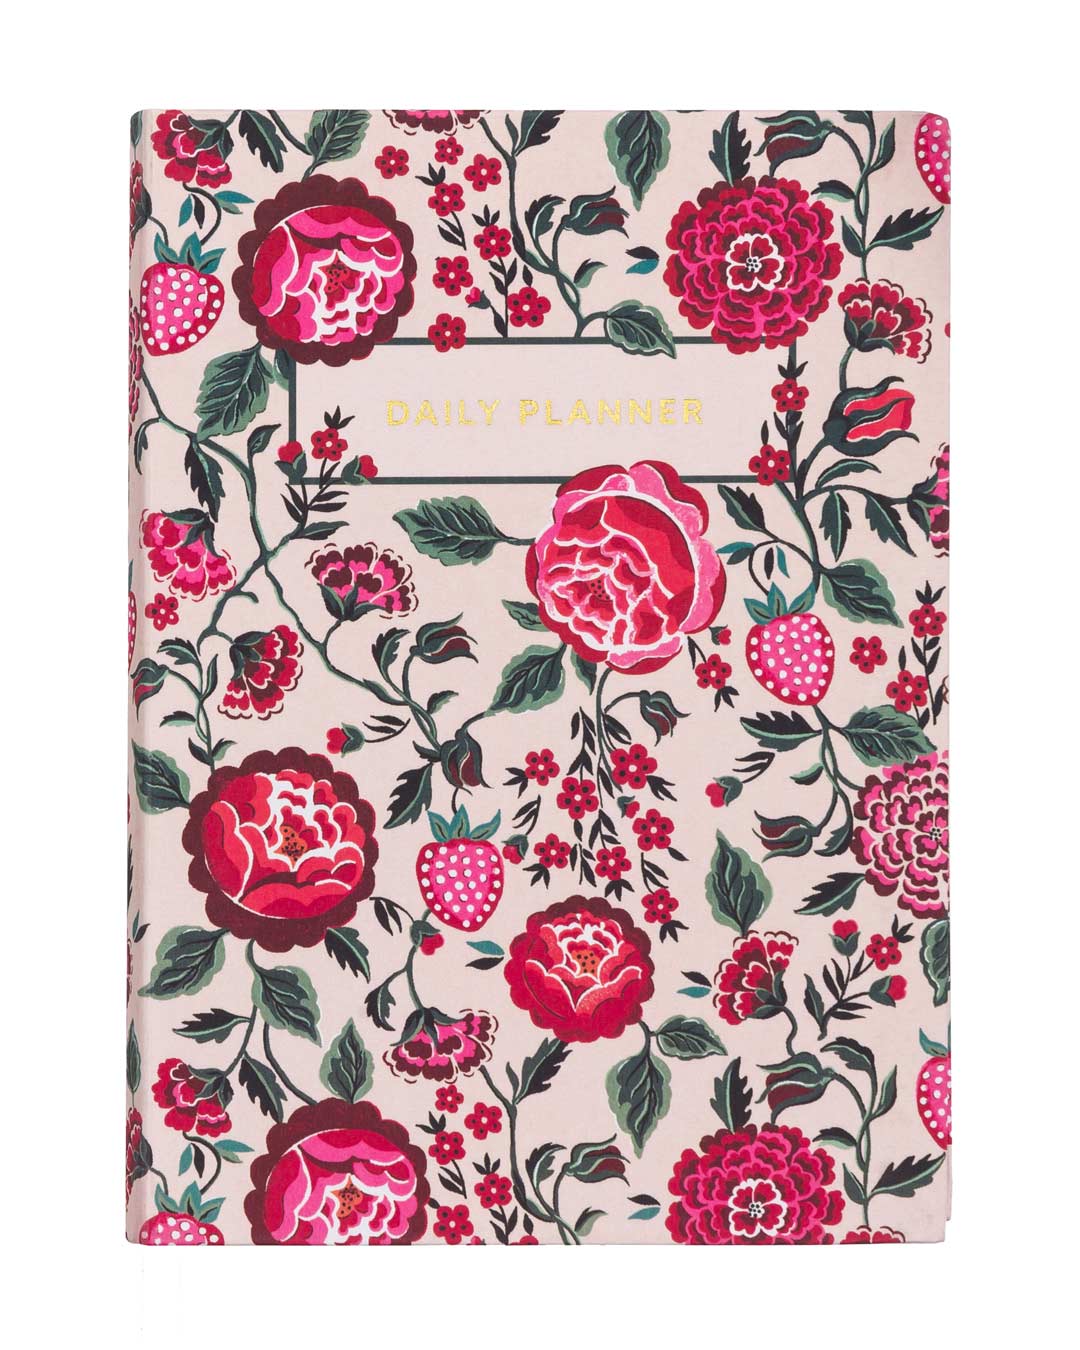 Cath Kidston Daily Planner Notebook | A5 Undated Diary | To Do List, Hourly Schedule, Priorities | Day To Day Planner | Strawberry